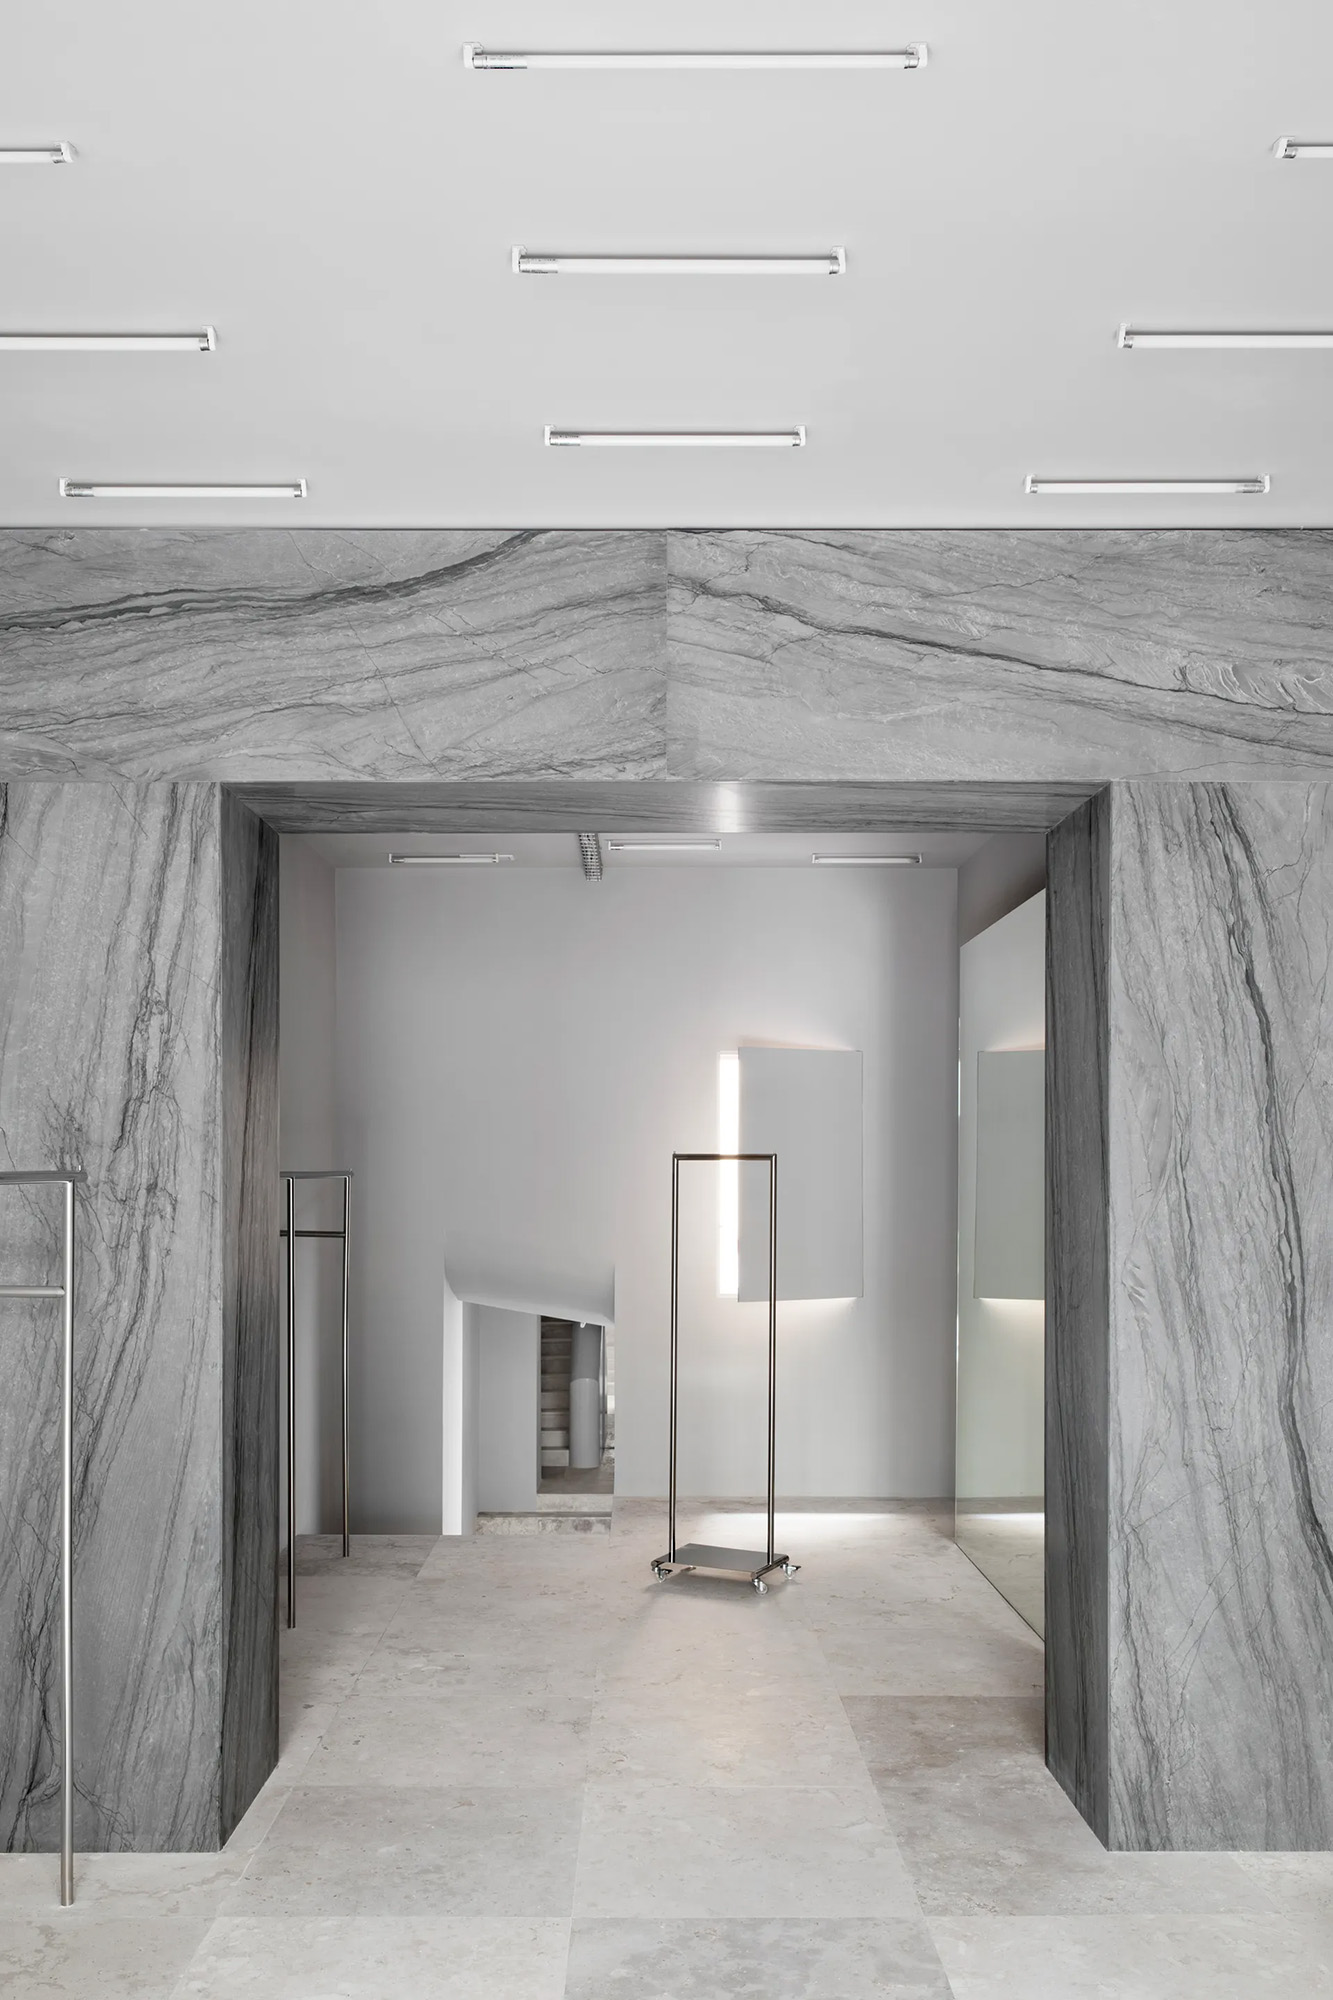 Image of Redondo20Store20SAIZ203 in A monolithic arch in Sensa Platino gives character to a new fashion shop in Madrid - Cosentino